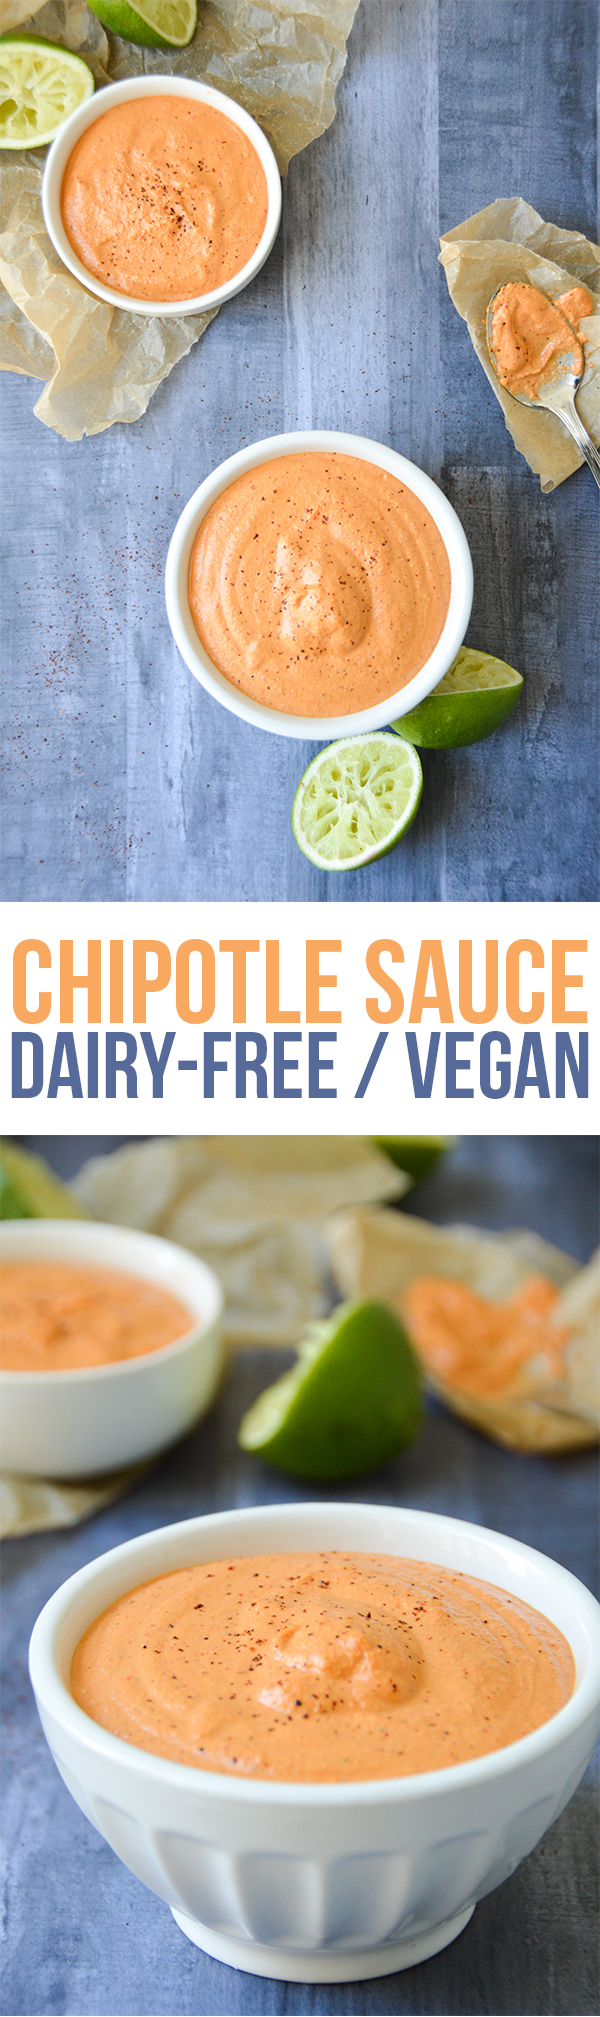 This creamy chipotle sauce is just like your favorite aioli but without the dairy. Perfect for dipping or spreading on your favorite Mexican dish.